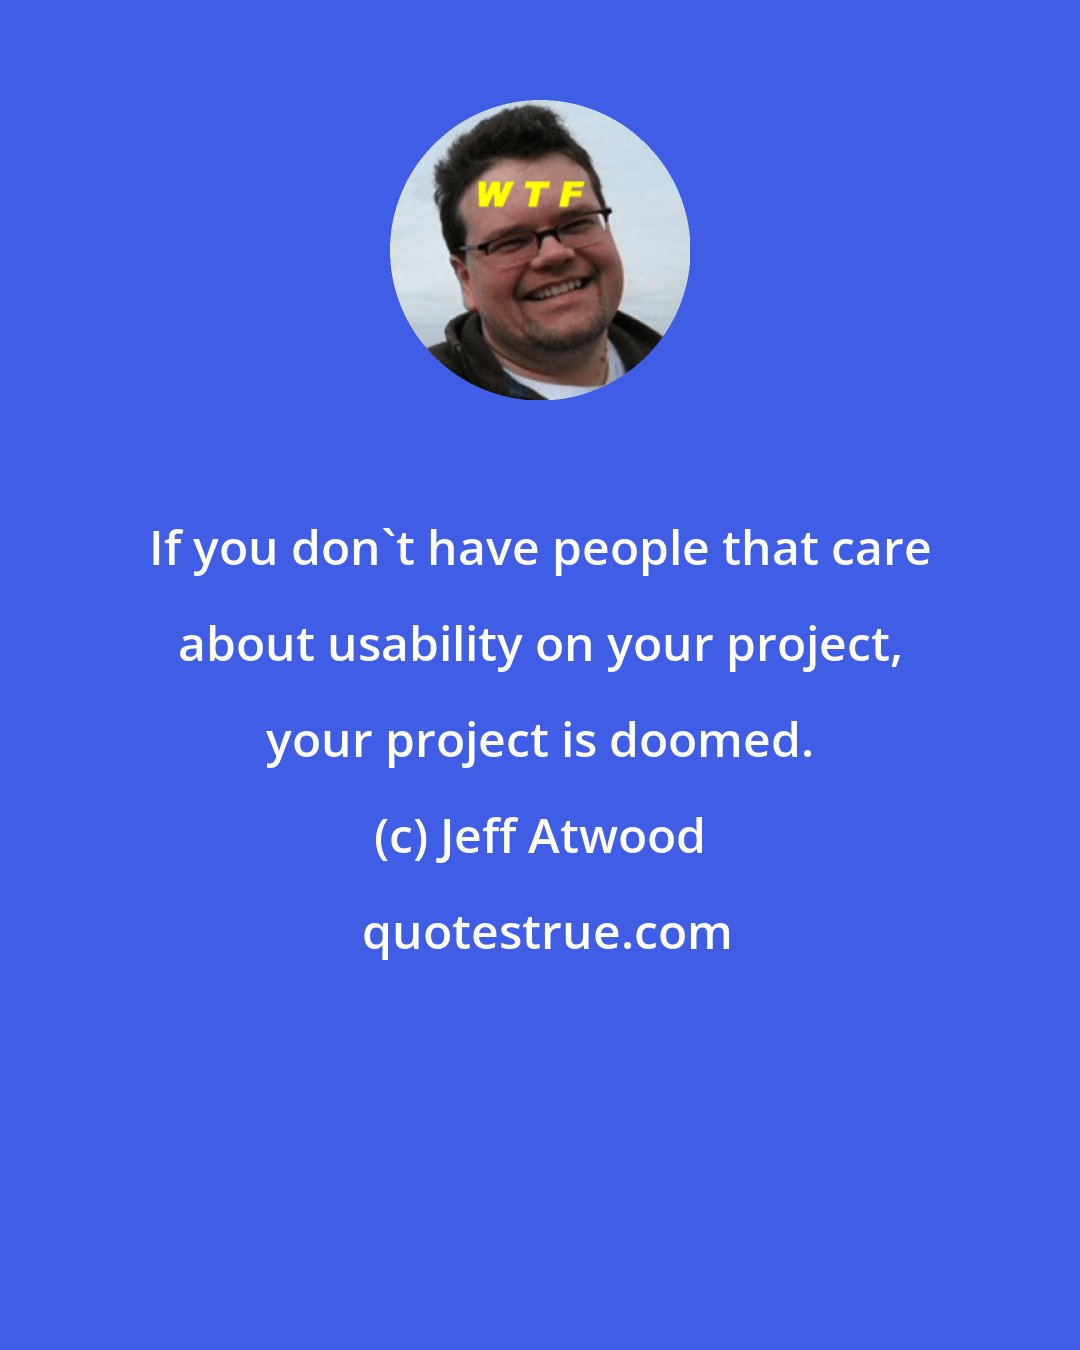 Jeff Atwood: If you don't have people that care about usability on your project, your project is doomed.